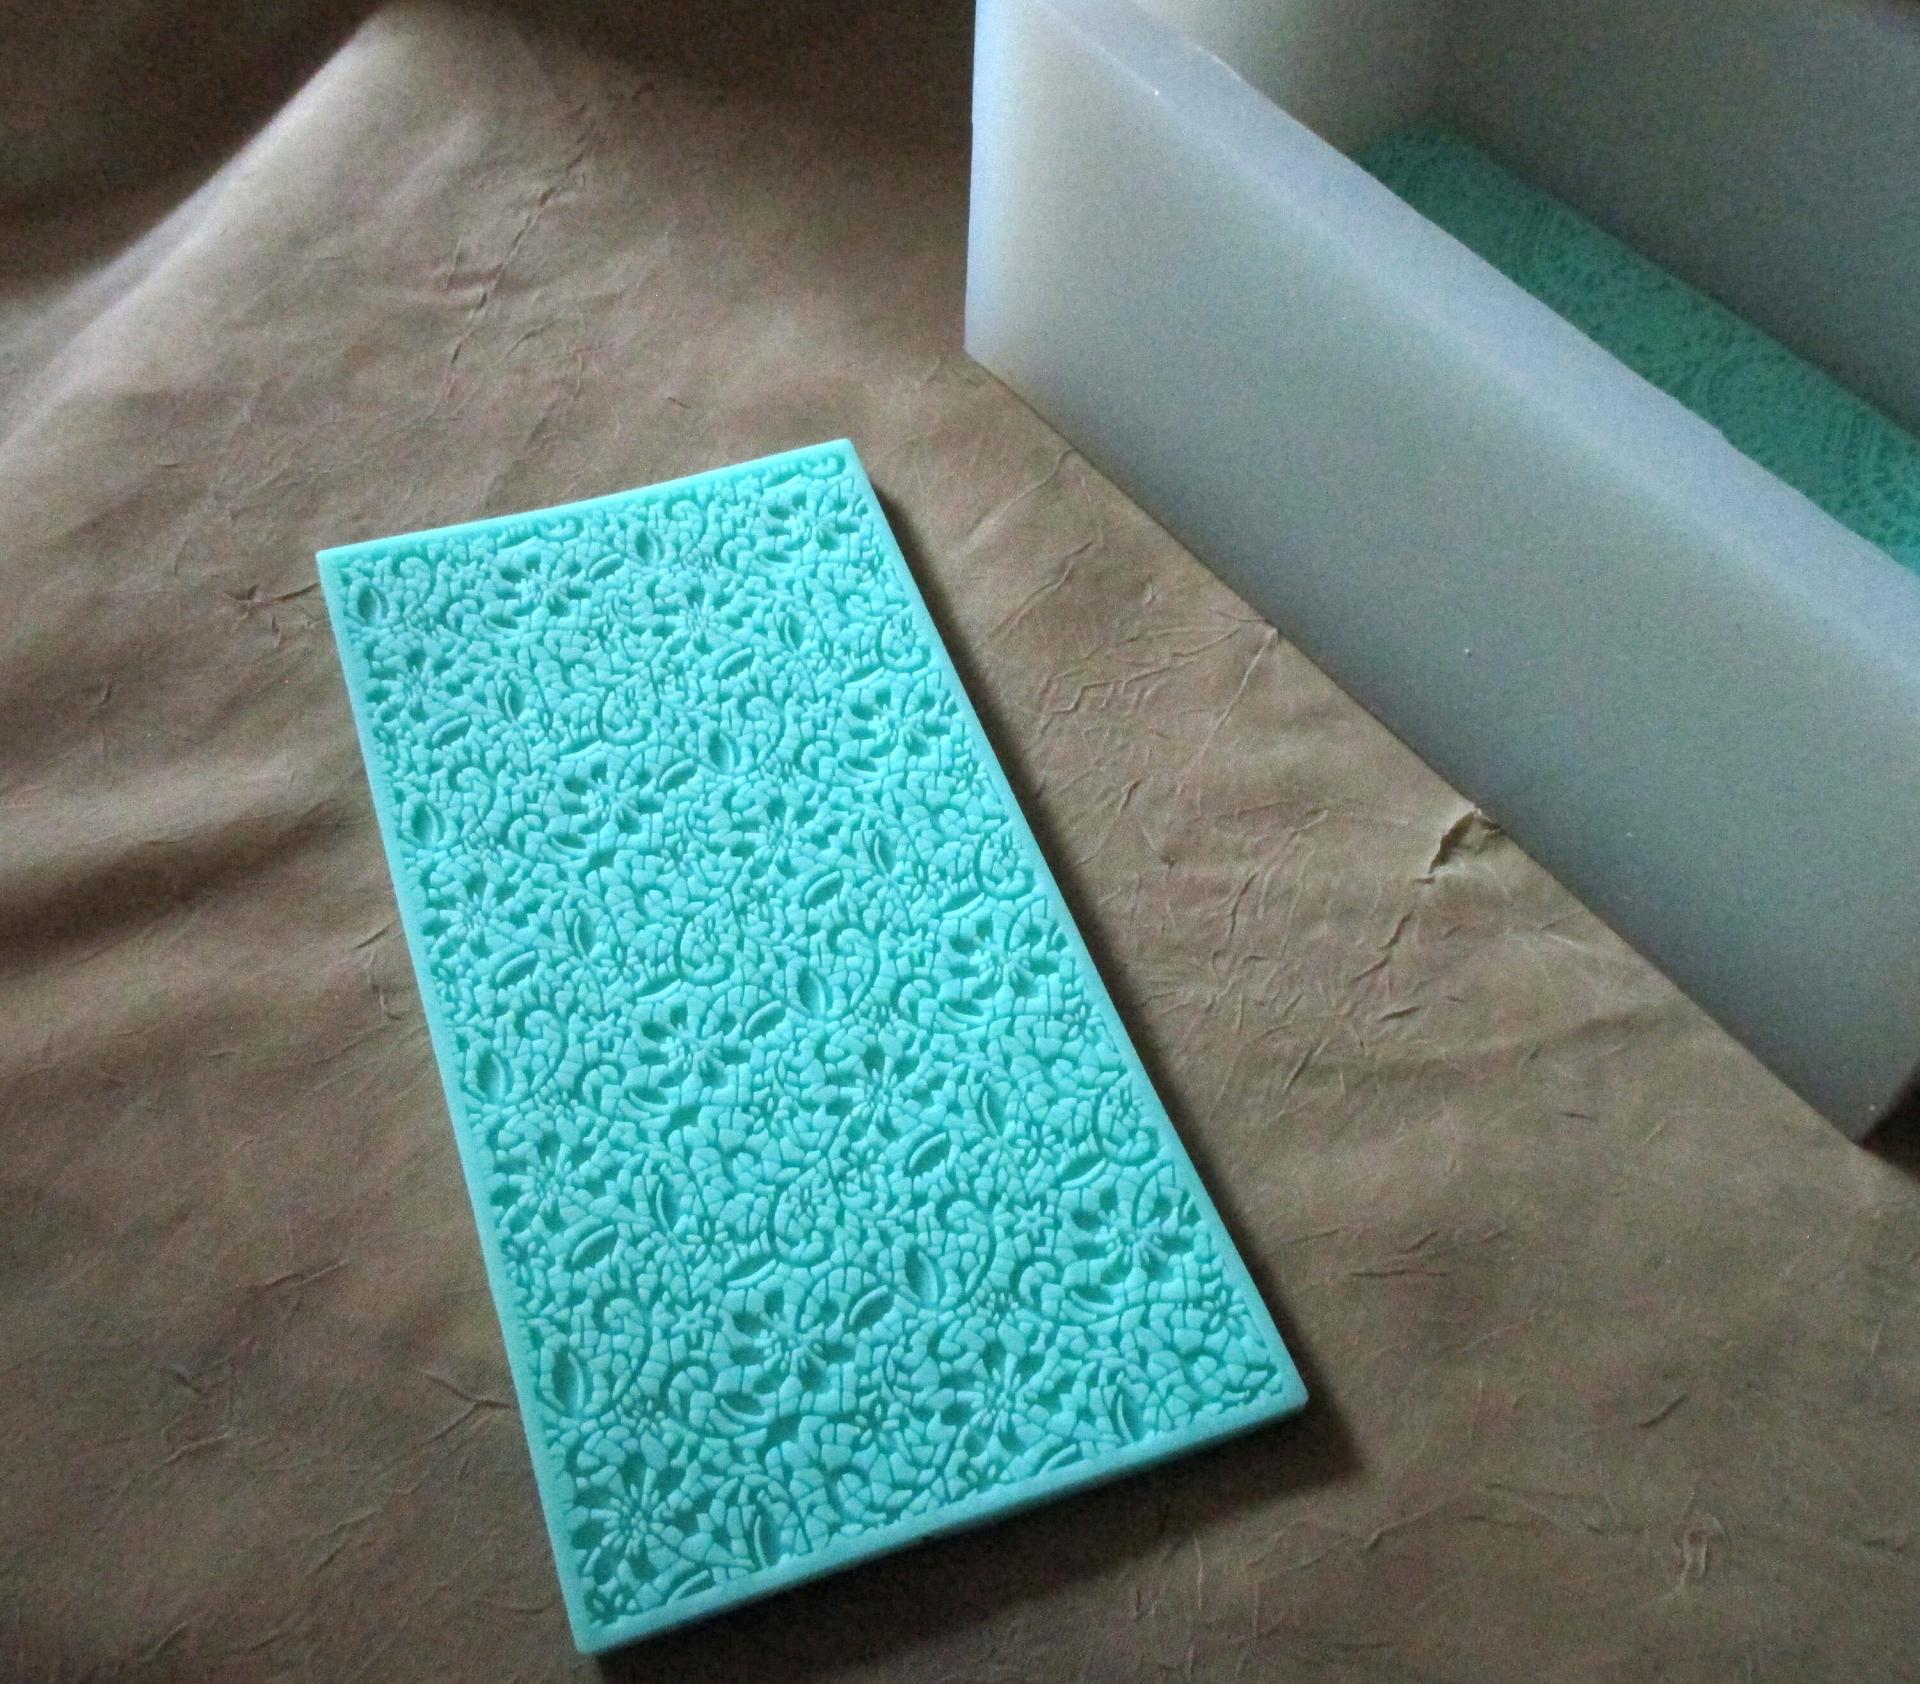 Silicone Floral Lace Mat Mold - Texture Stamp, Embossing Stamp - for use with Clay, Casting, for Soap, or Baking